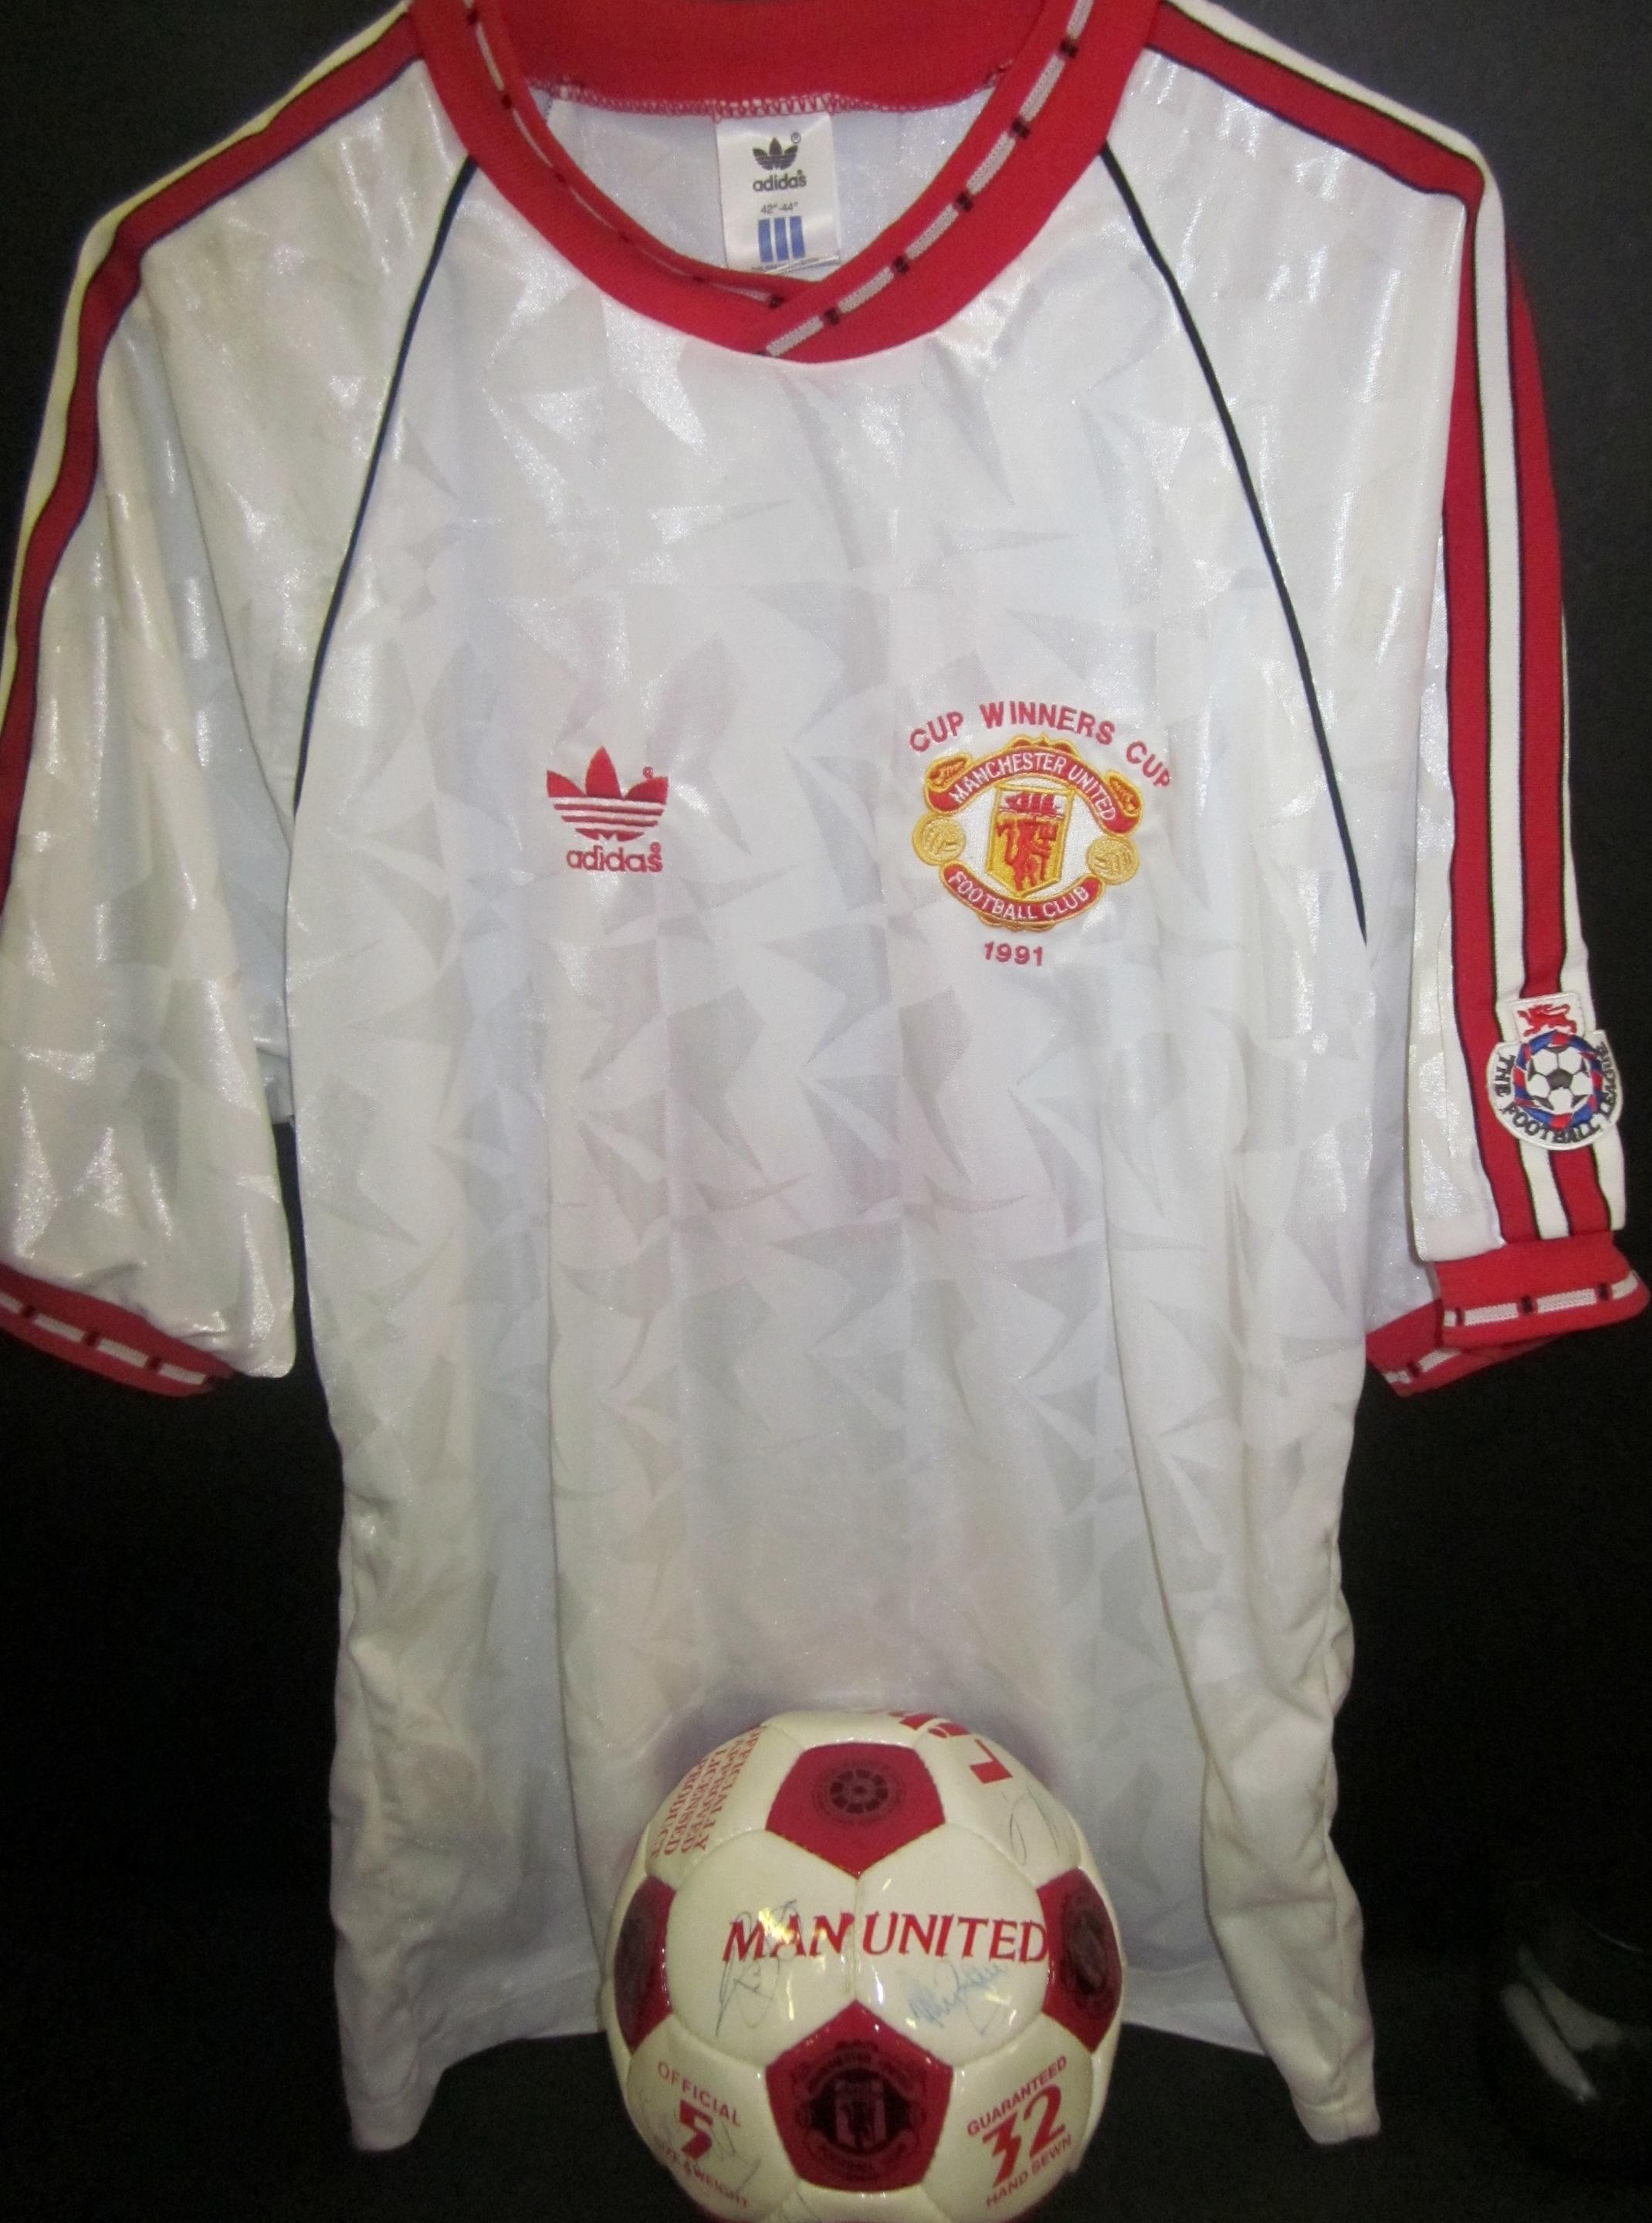 Lot 1 - MANCHESTER UNITED - 1991 SHIRT SIGNED BY